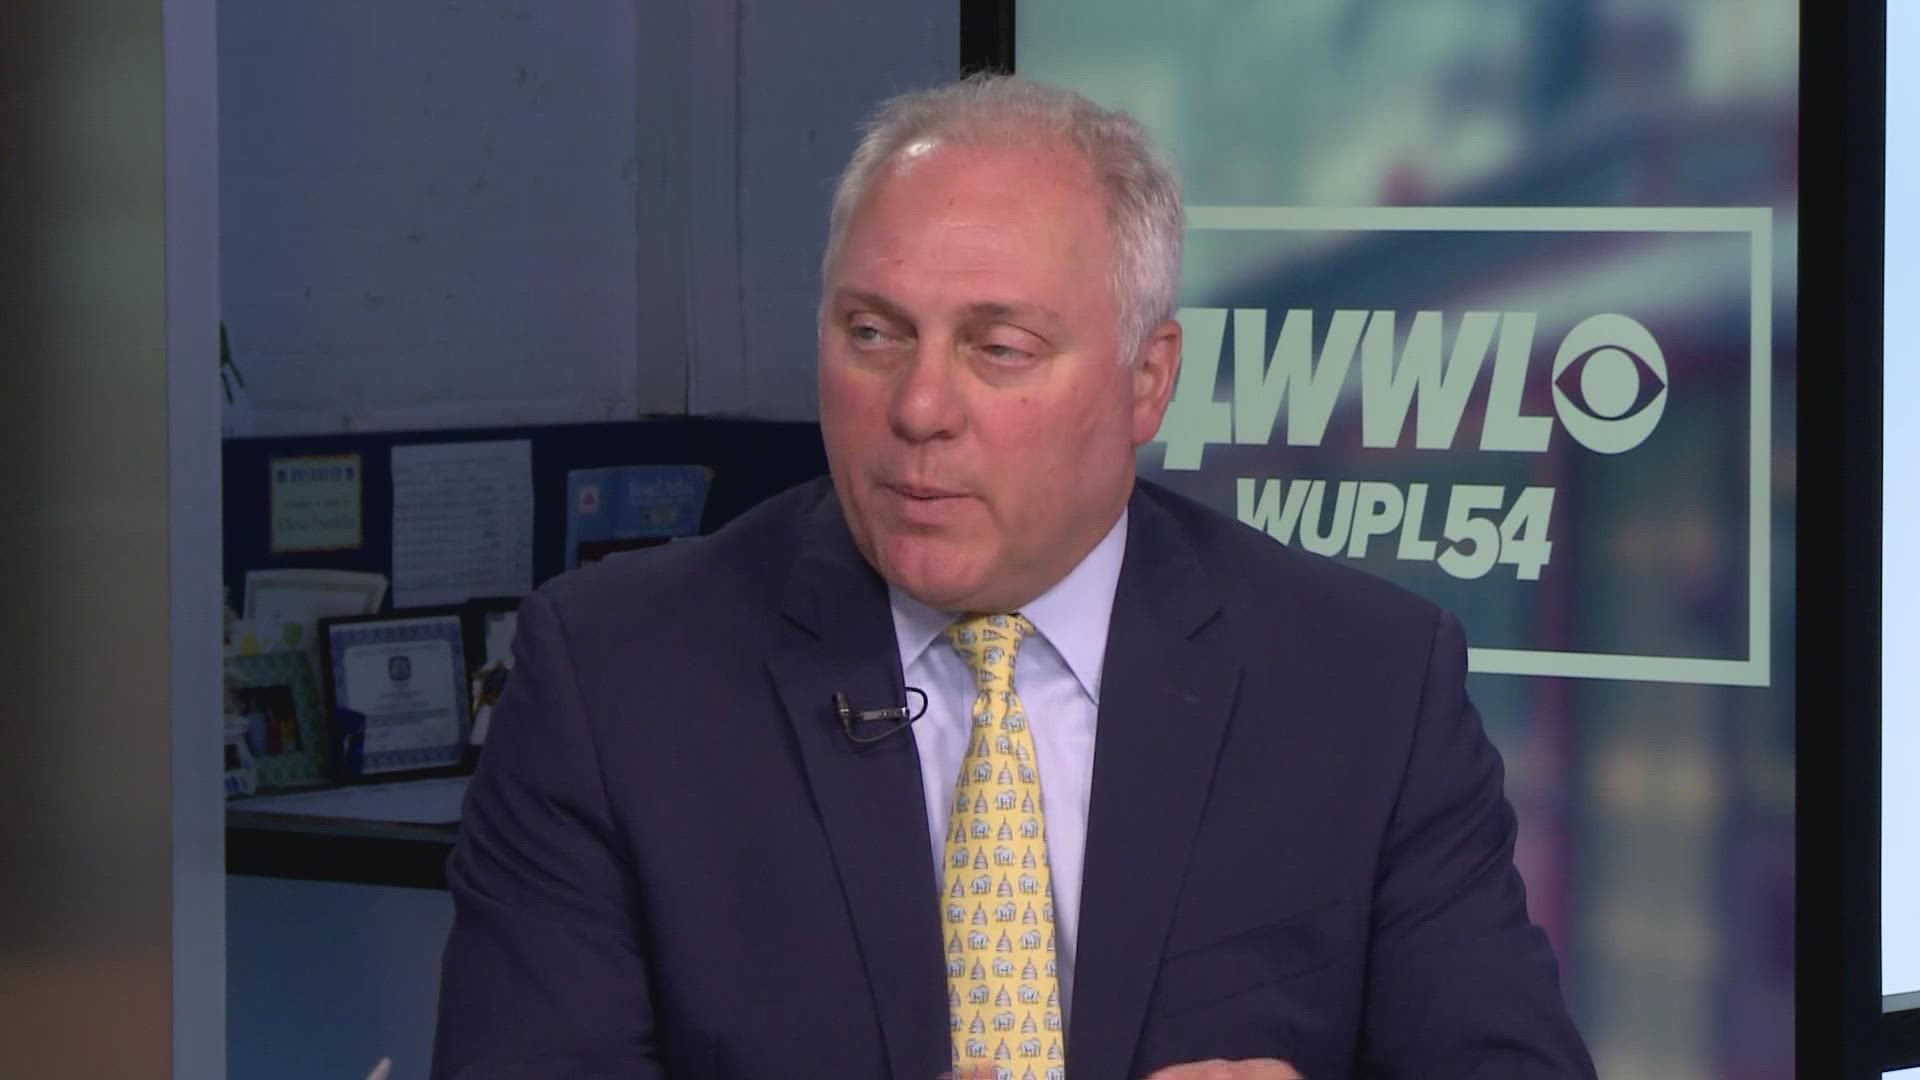 Congressman Steve Scalise, R-Louisiana, talked with Eric Paulsen on a number of topics including recent bills, abortion issues and the raid on Mar-a-Lago.